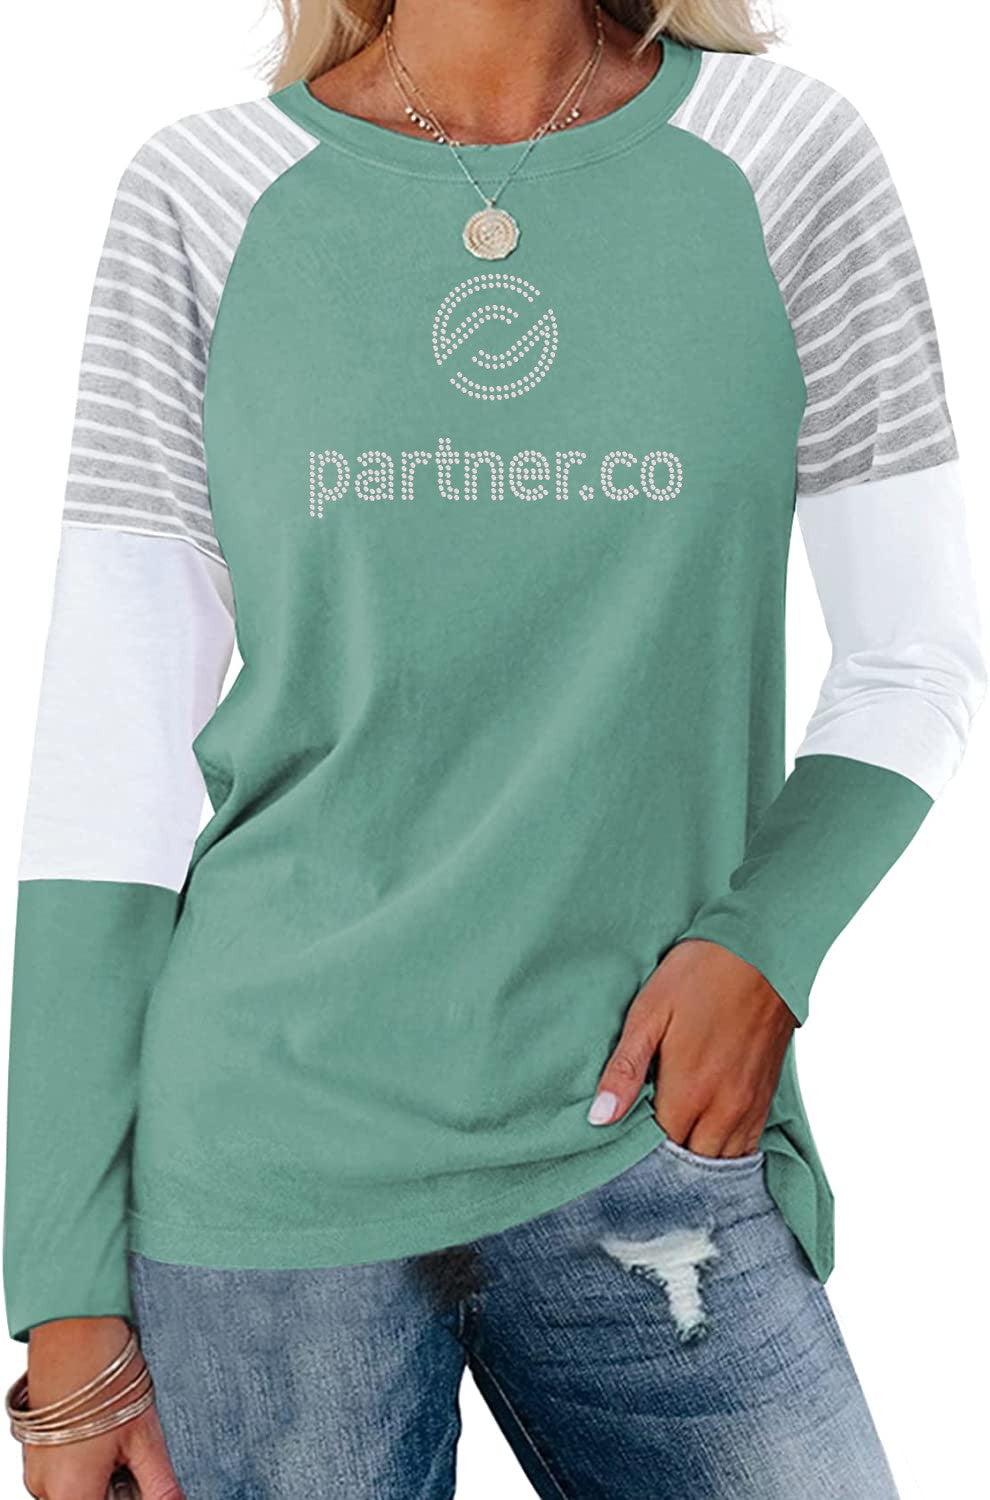 Partner.Co | BLING BUSINESS CASUAL Collection Tri-Color Stripe Long Sleeve Top